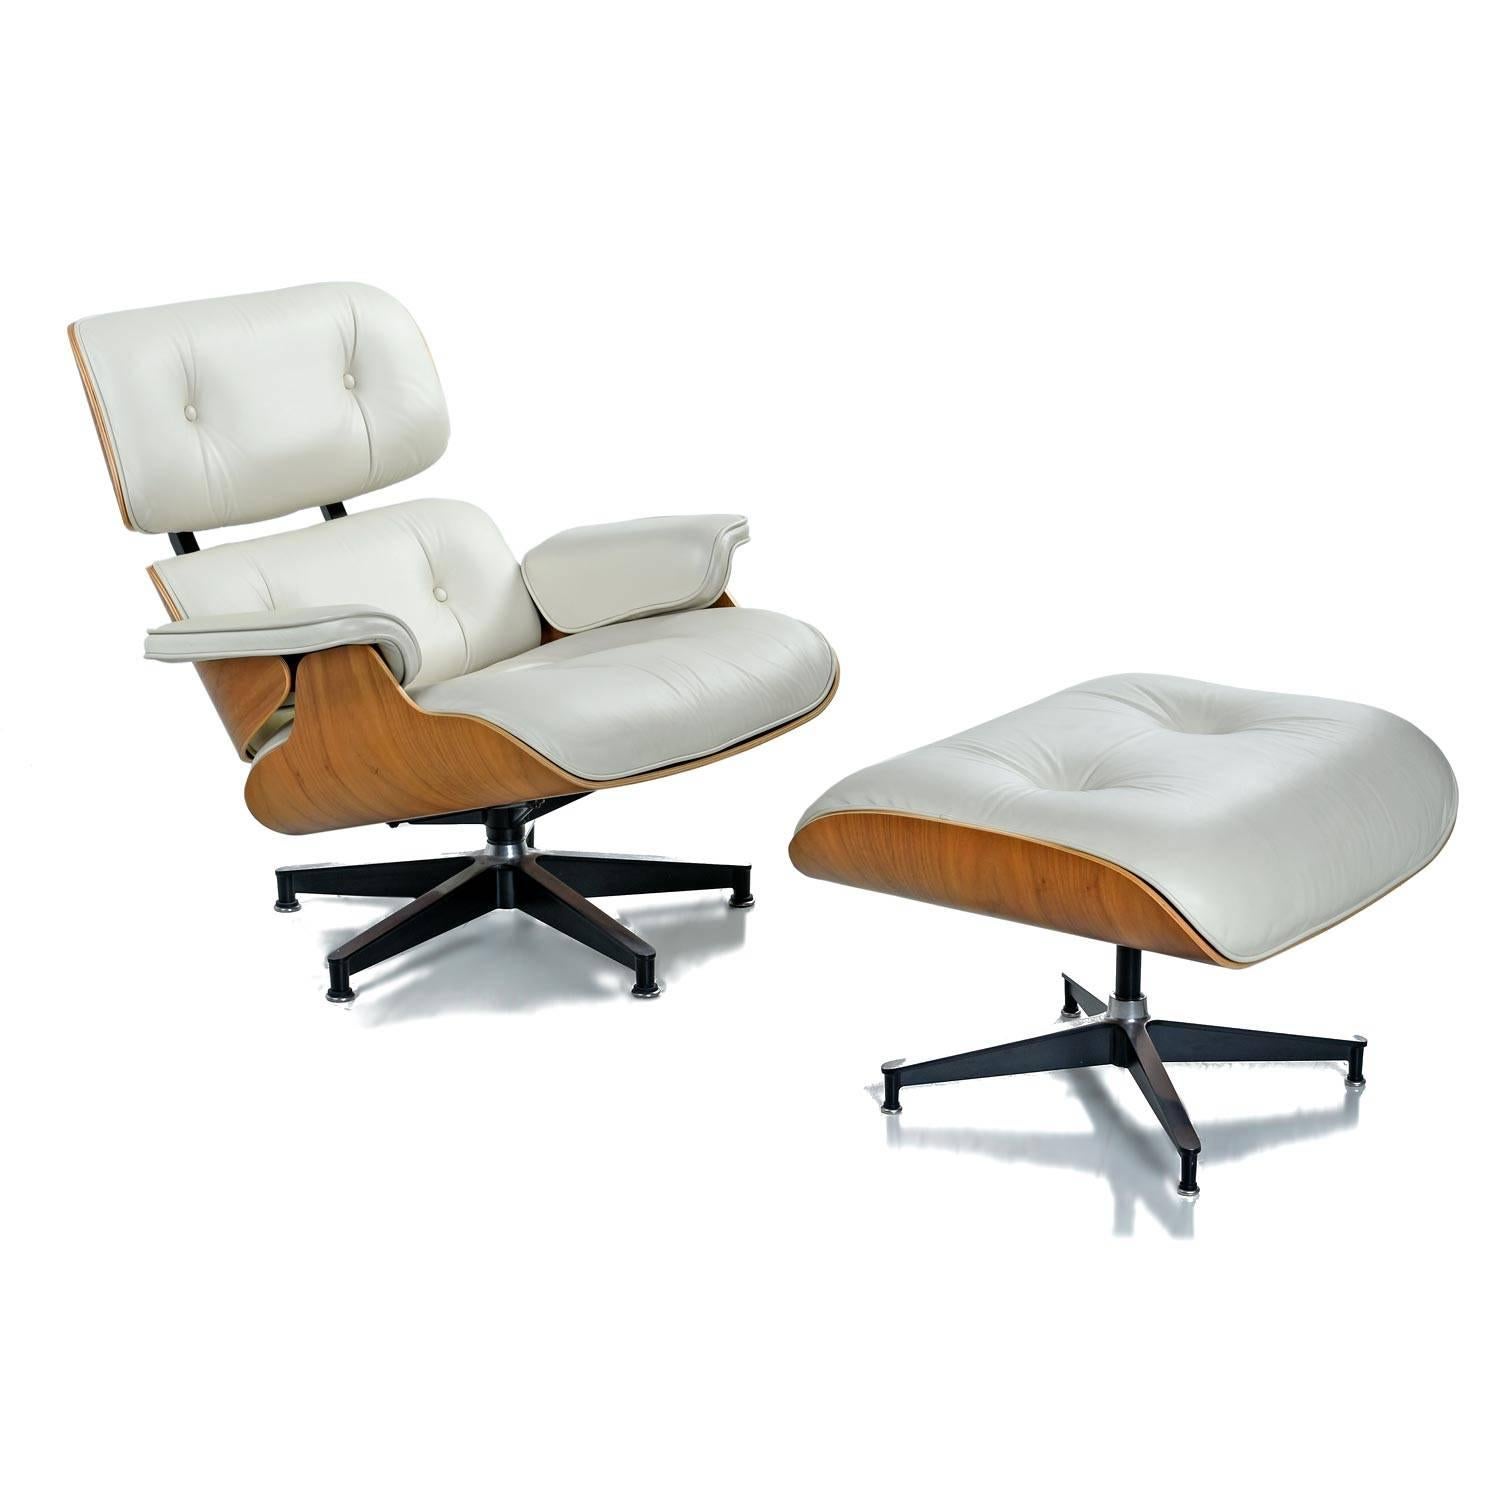 Iconic Mid-Century Modern Herman Miller Eames chair. Ivory genuine leather with walnut shell. Reclining chair comes with matching ottoman. Approximately 10 years old. Chair saw little use and shows no notable wear. Herman Miller label present